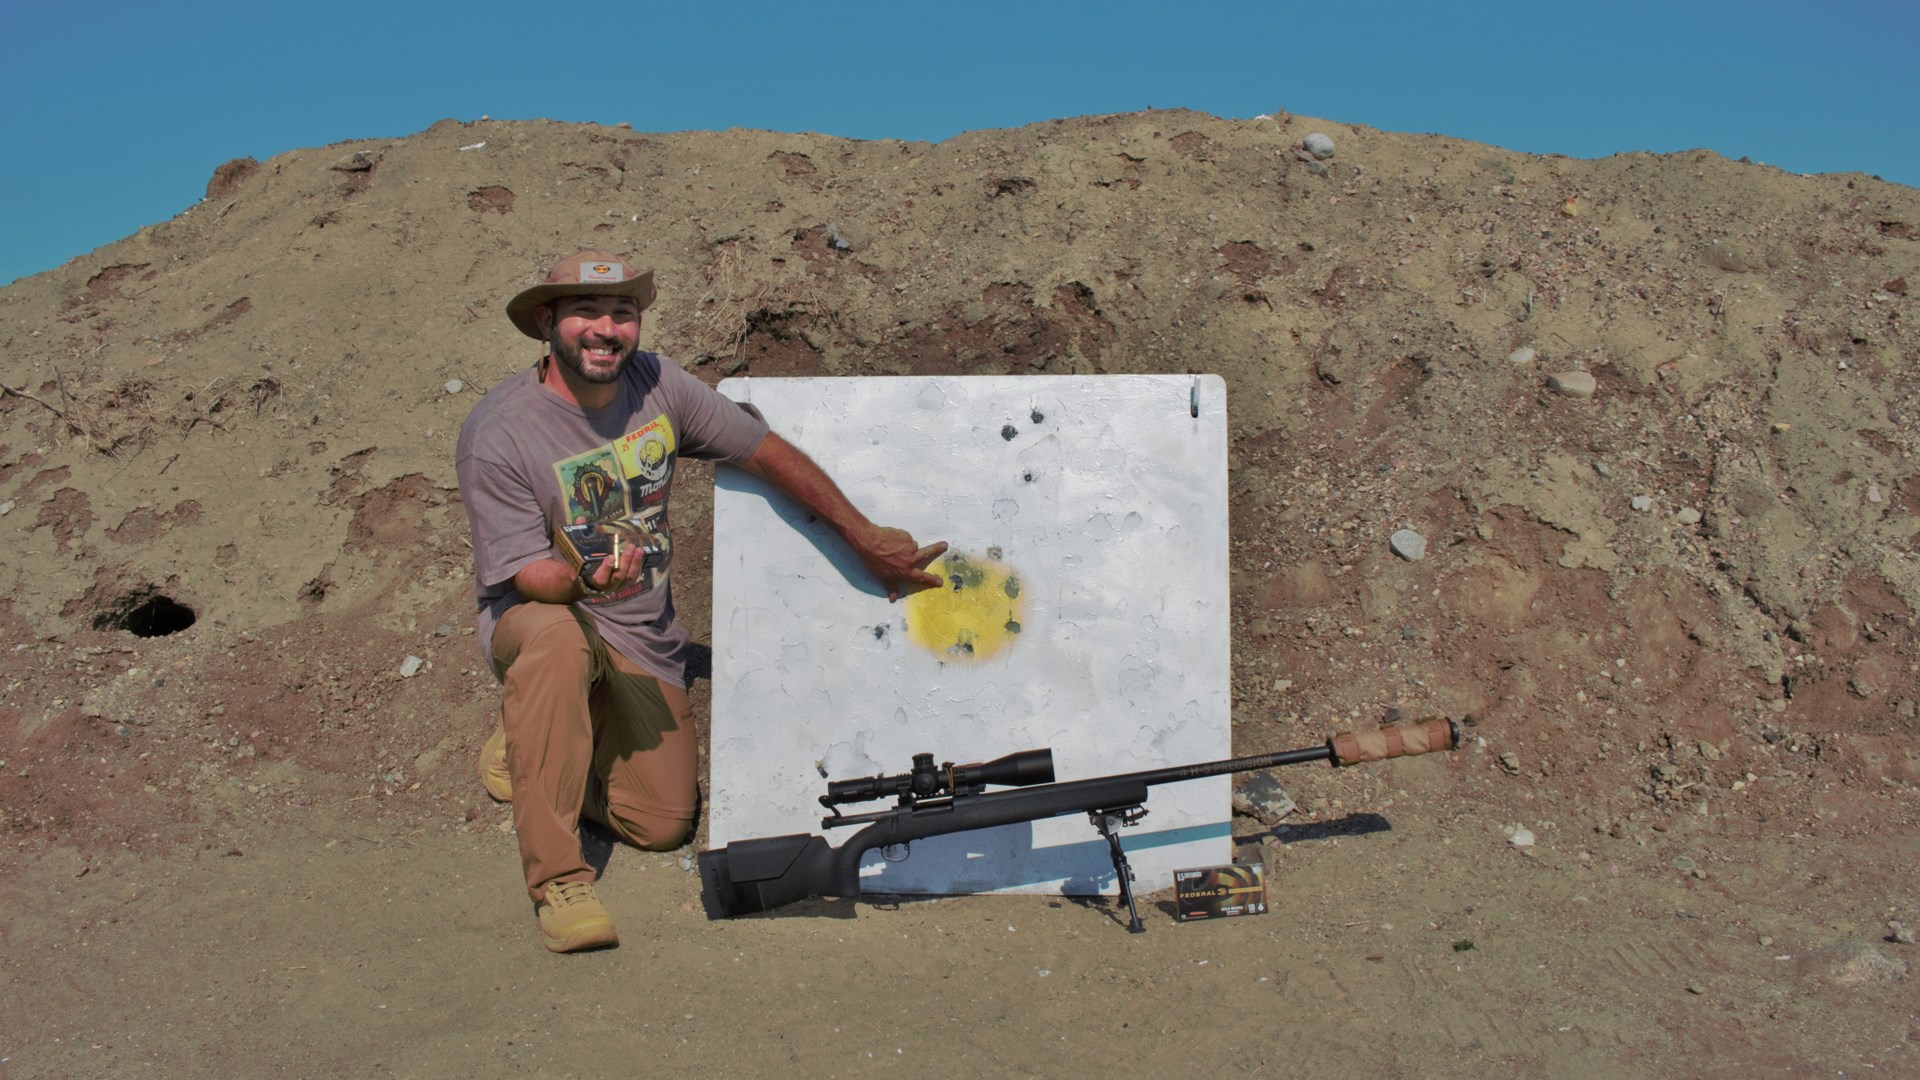 Author Frank Melloni knelt next to white square target one-mile with rifle bolt-action hill behind blue sky